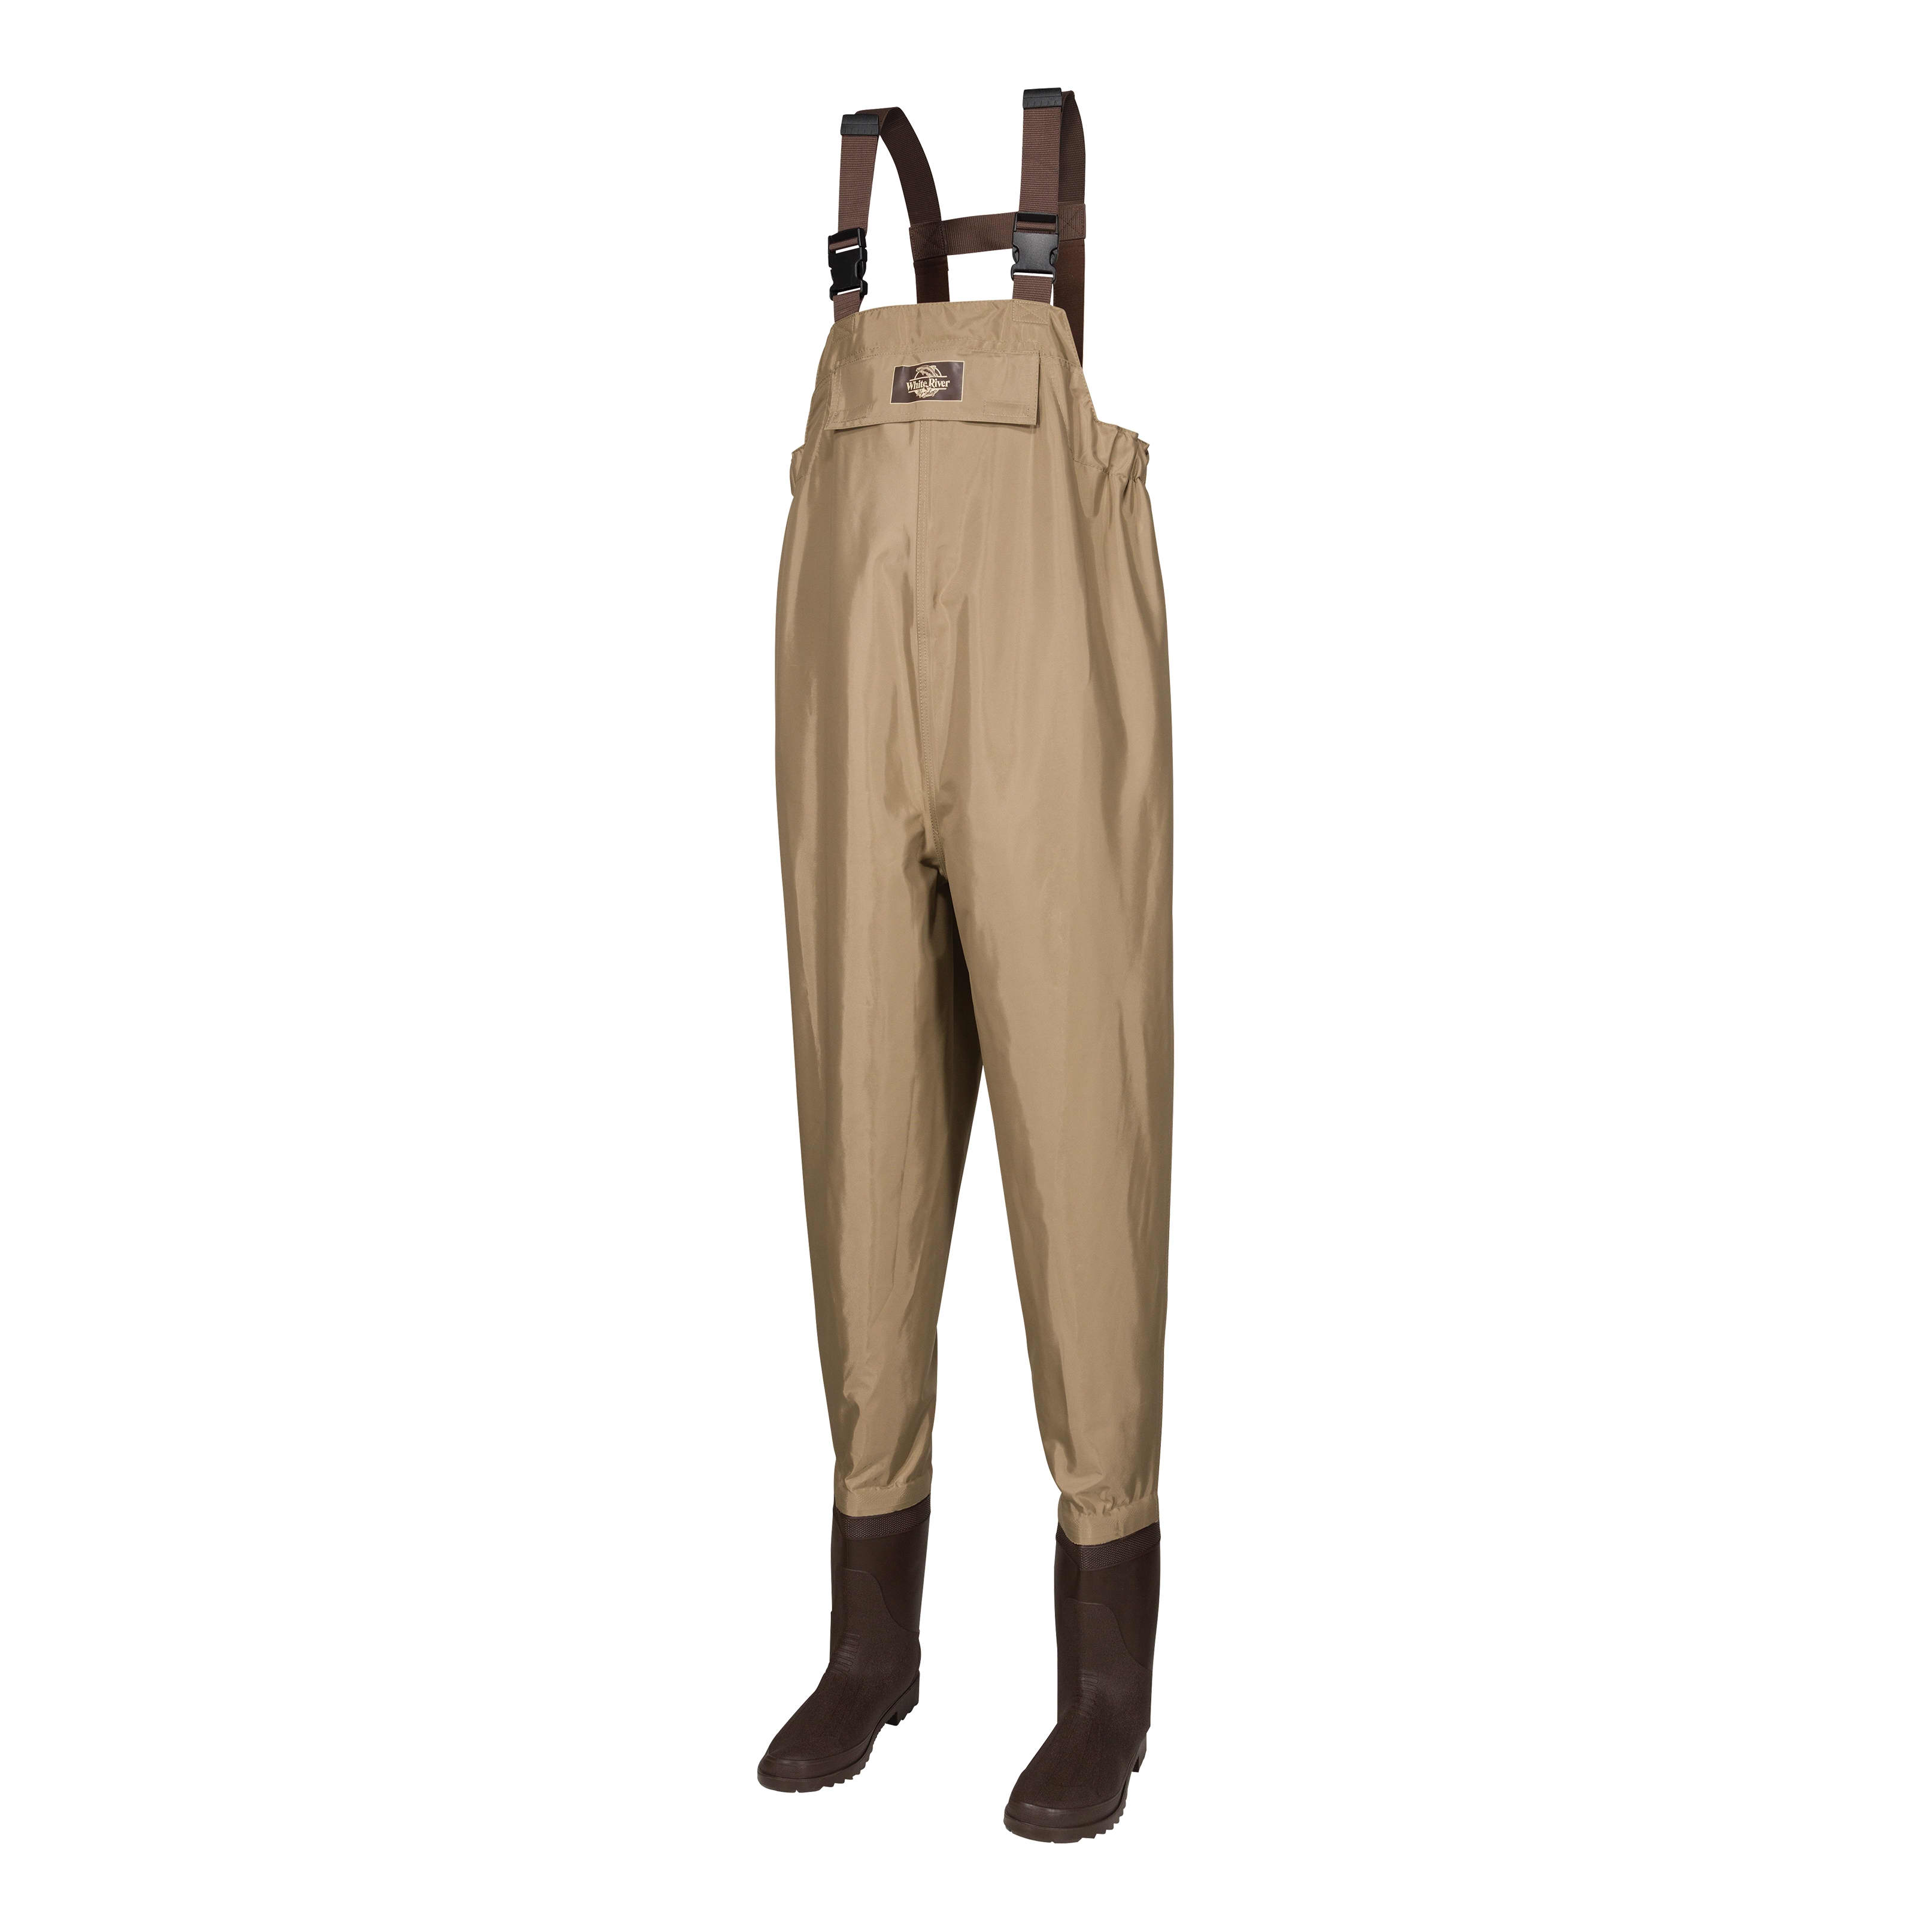 White River Fly Shop Extreme Steelhead Waders with Korkers Boots